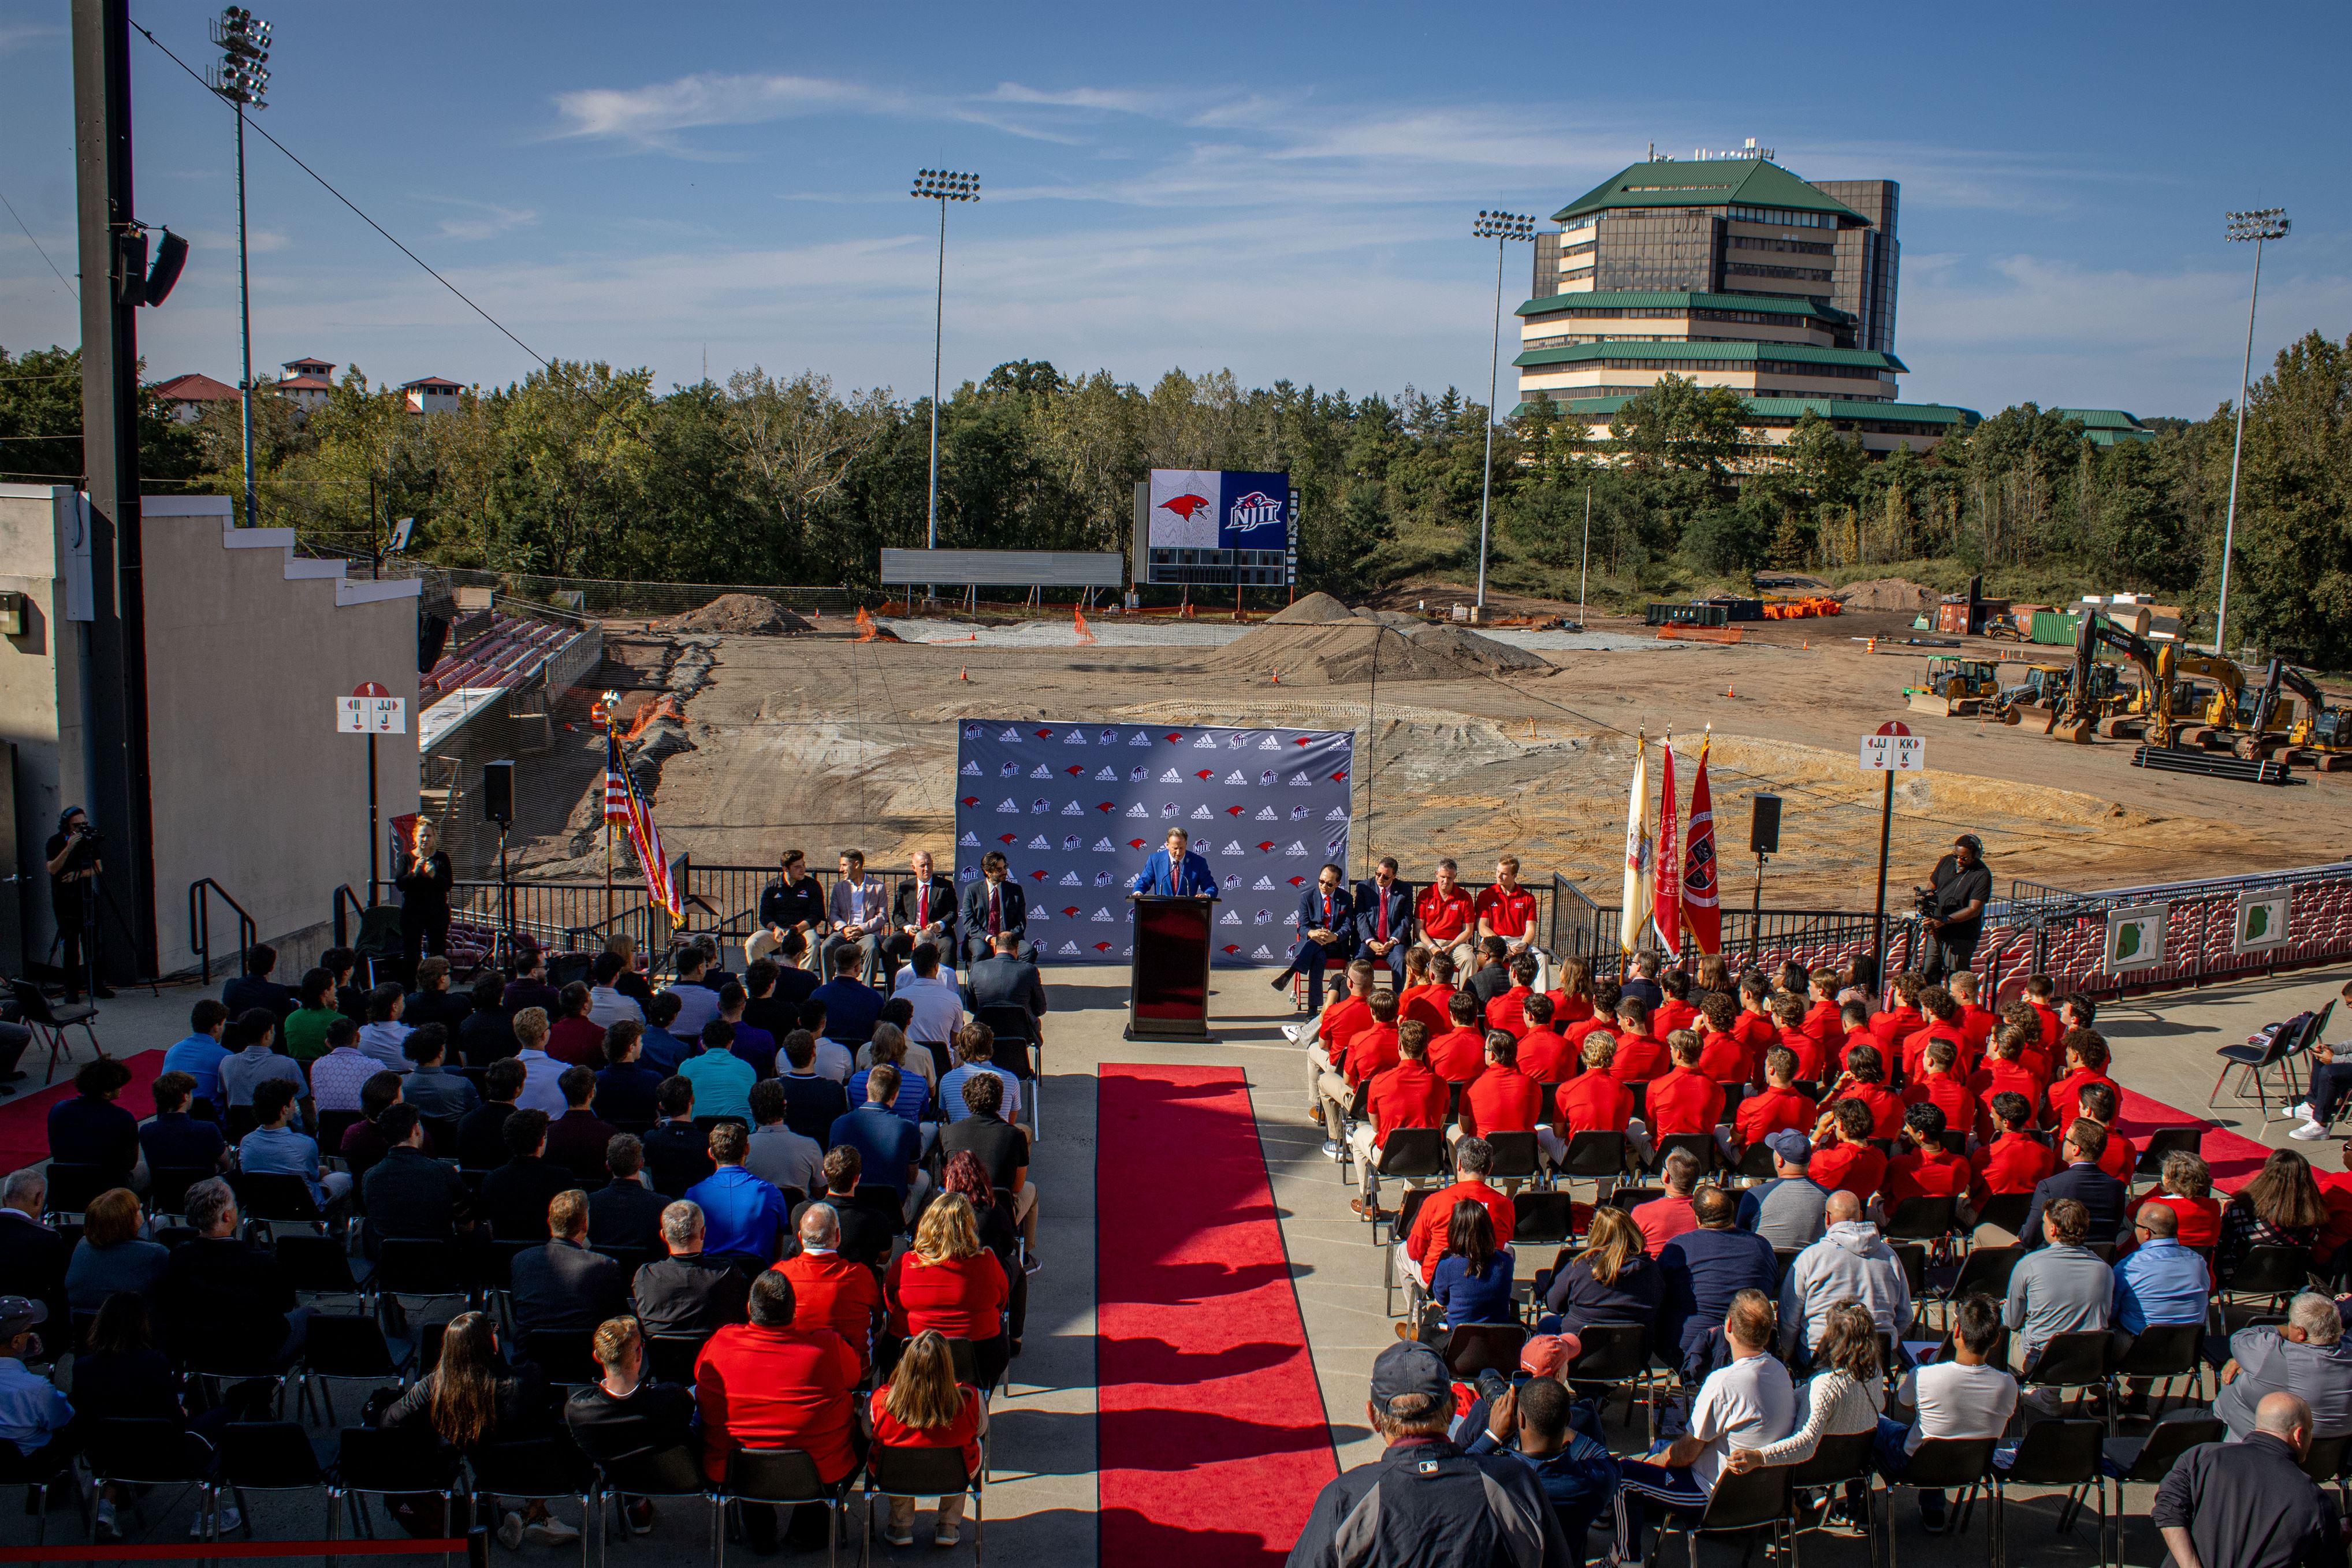 Press conference held on September 27th about the Yogi Berra stadium's new construction. Dani Mazariegos | The Montclarion